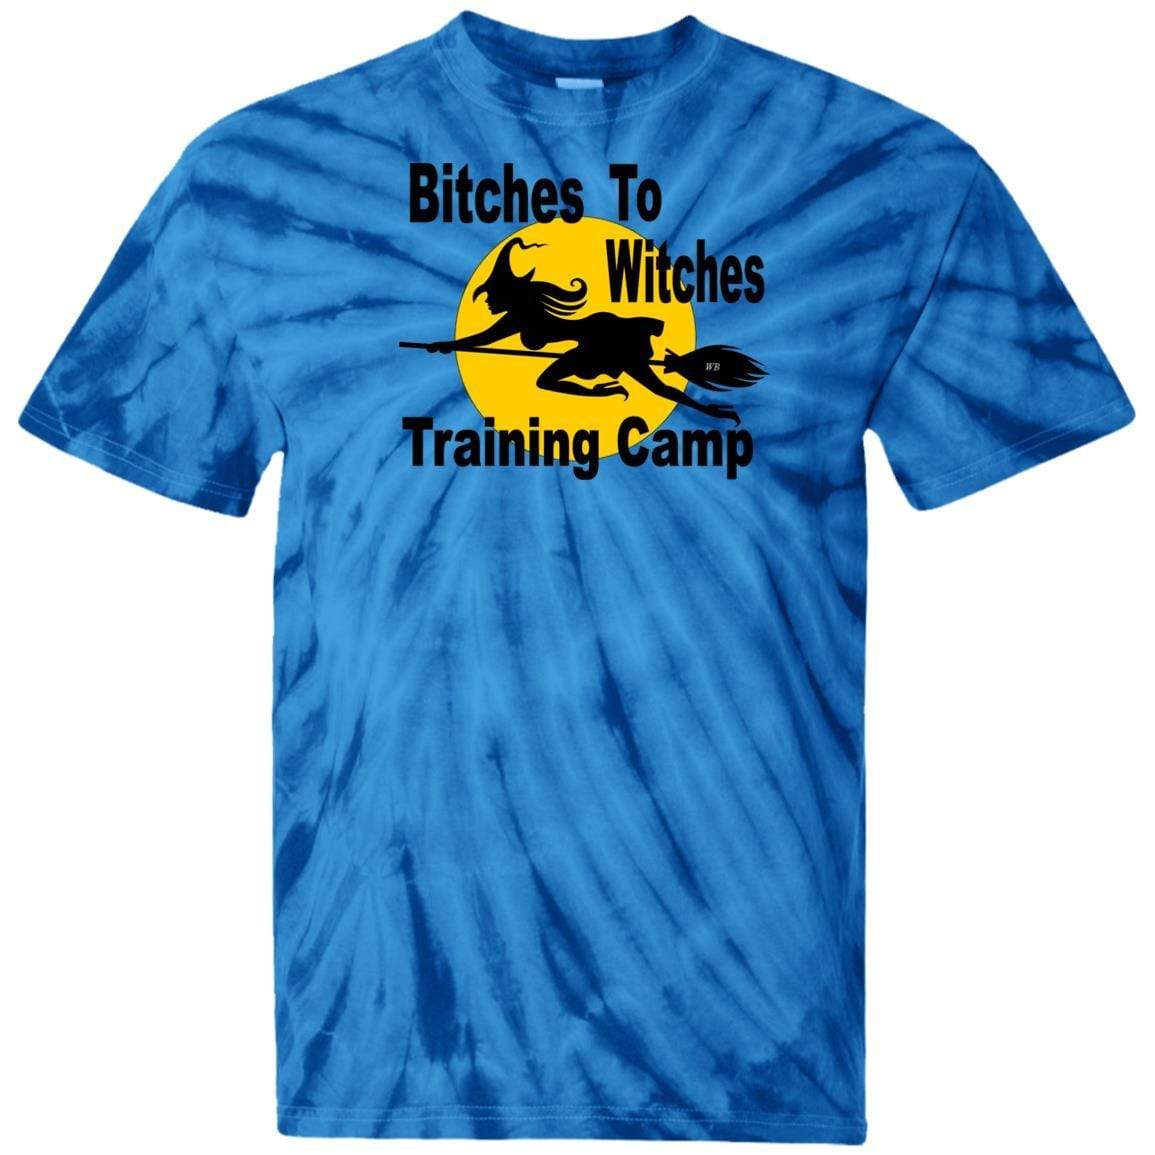 T-Shirts SpiderRoyal / S WineyBitches.Co "Bitches To Witches Training Camp" - 100% Cotton Tie Dye T-Shirt WineyBitchesCo